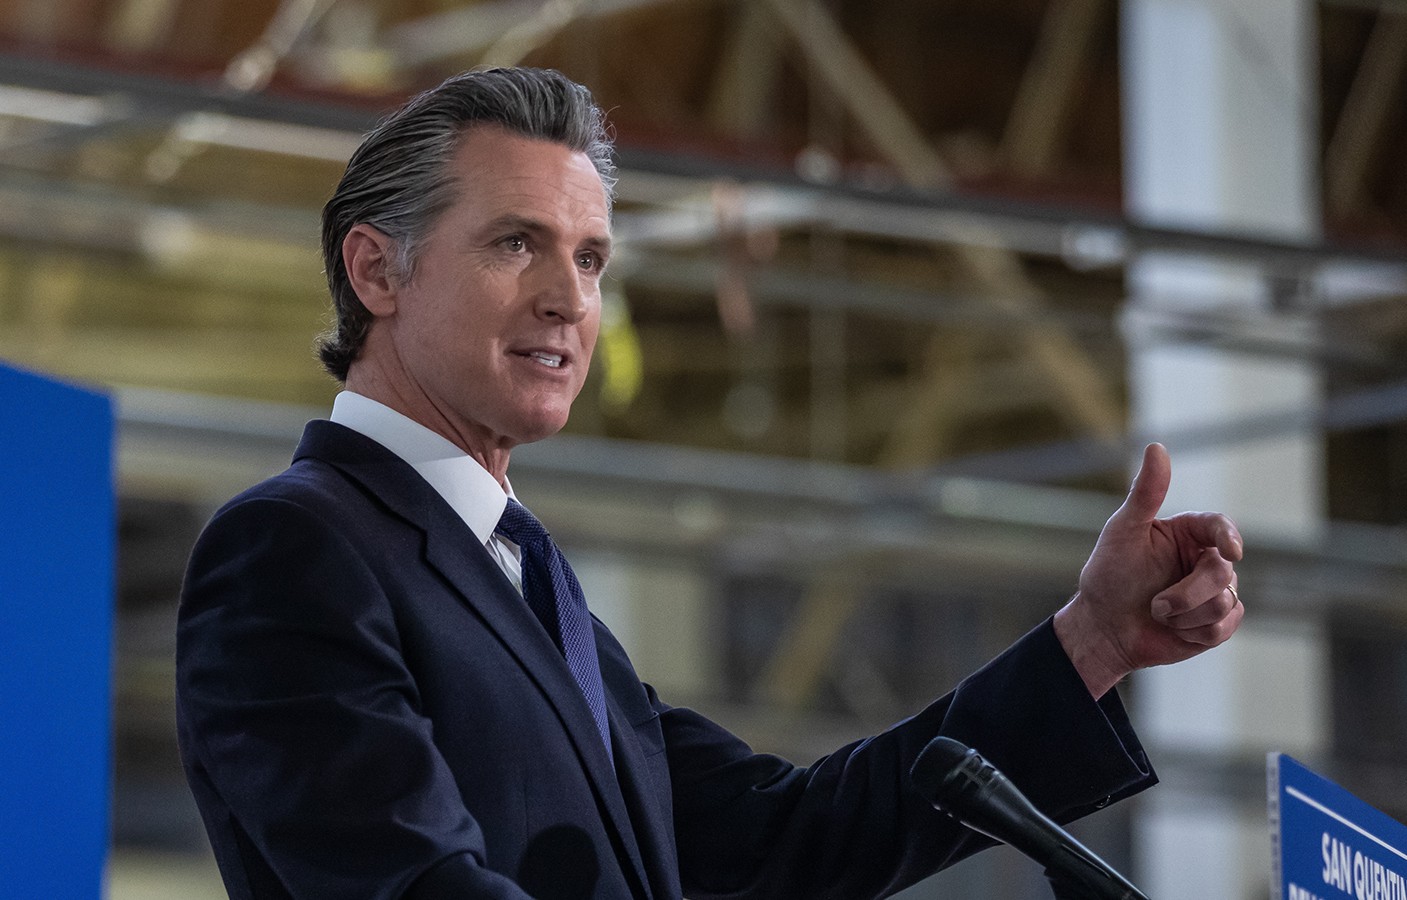 What to look for when Newsom unveils budget - Folsom Times